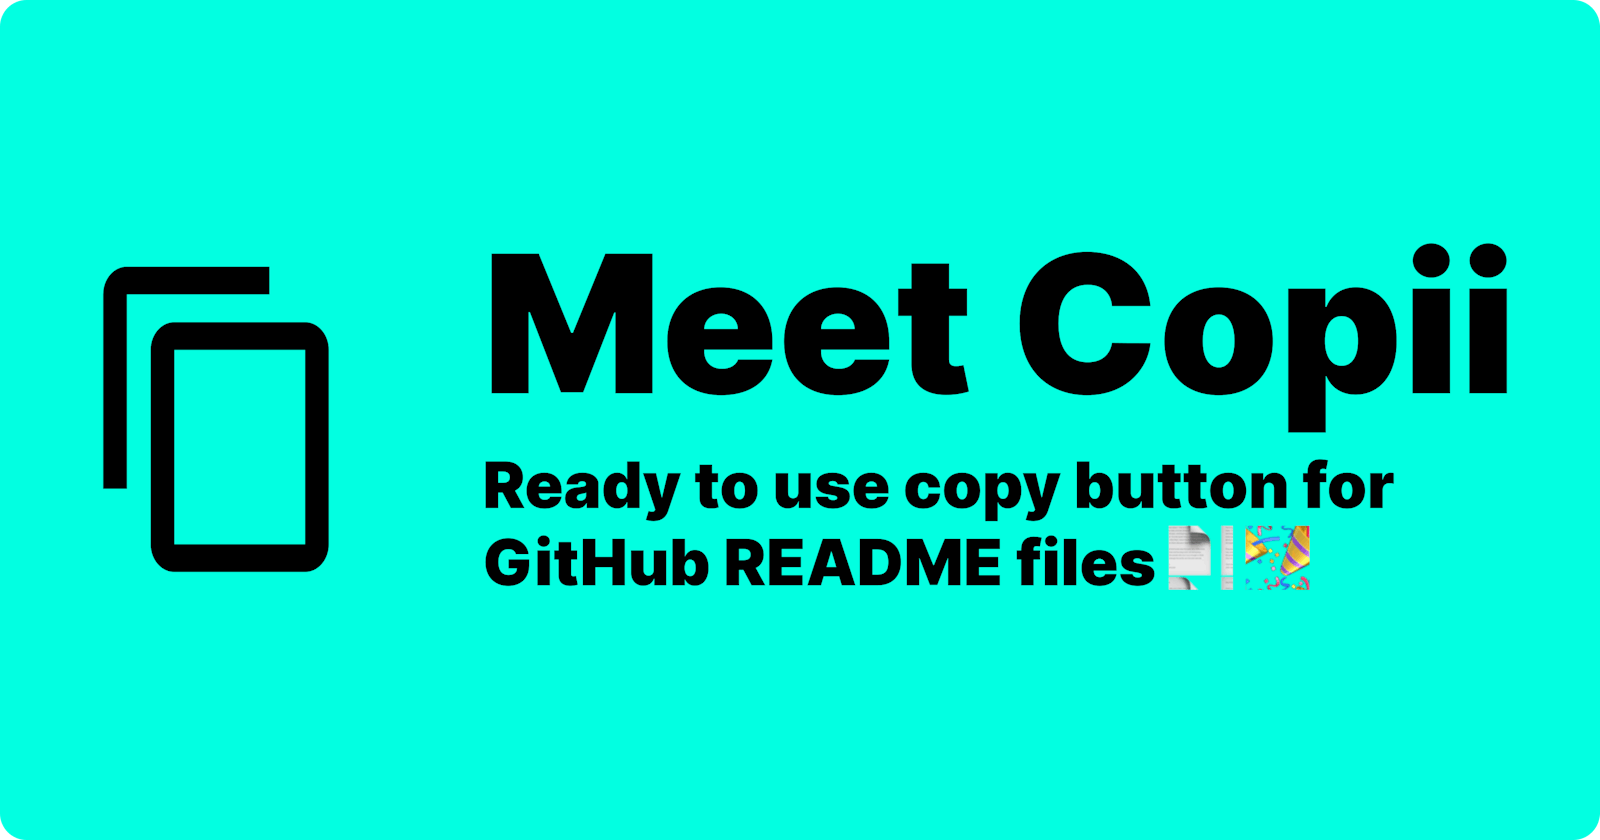 Copii. Ready to use fully functional copy button for GitHub README files 📄 🎉